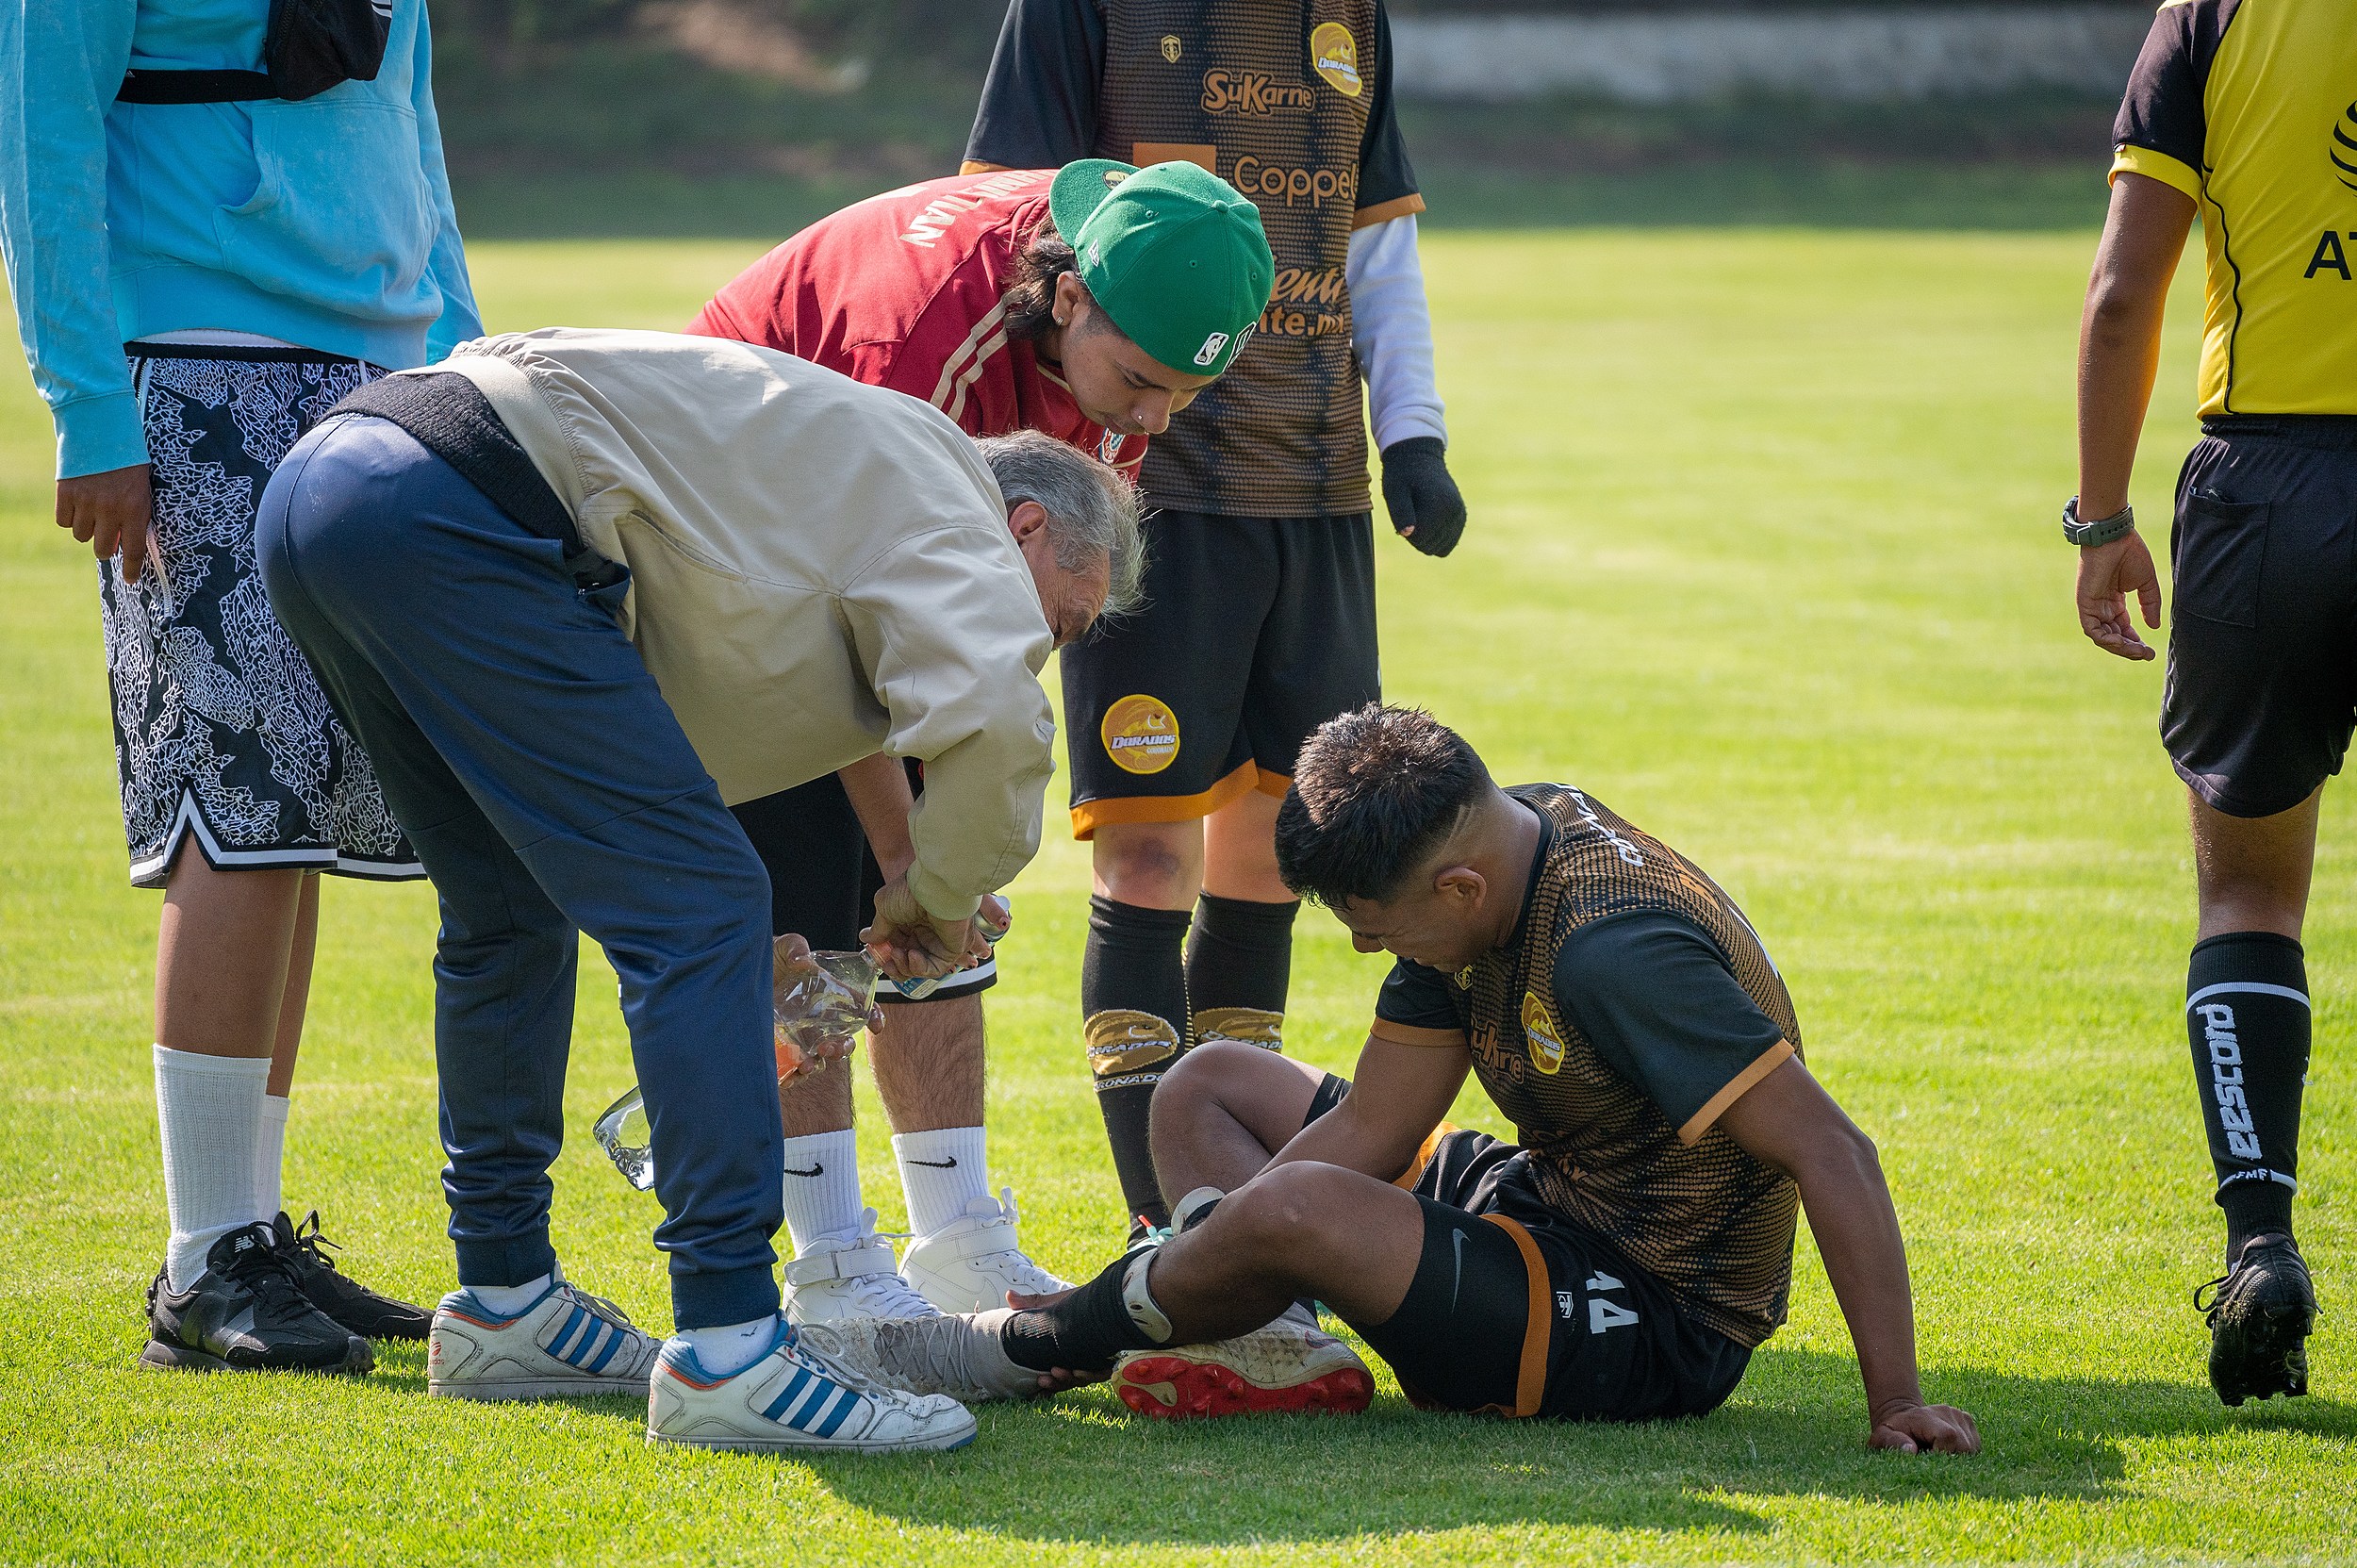 How Sports Medicine Nurses Help Athletes Recover From Injuries